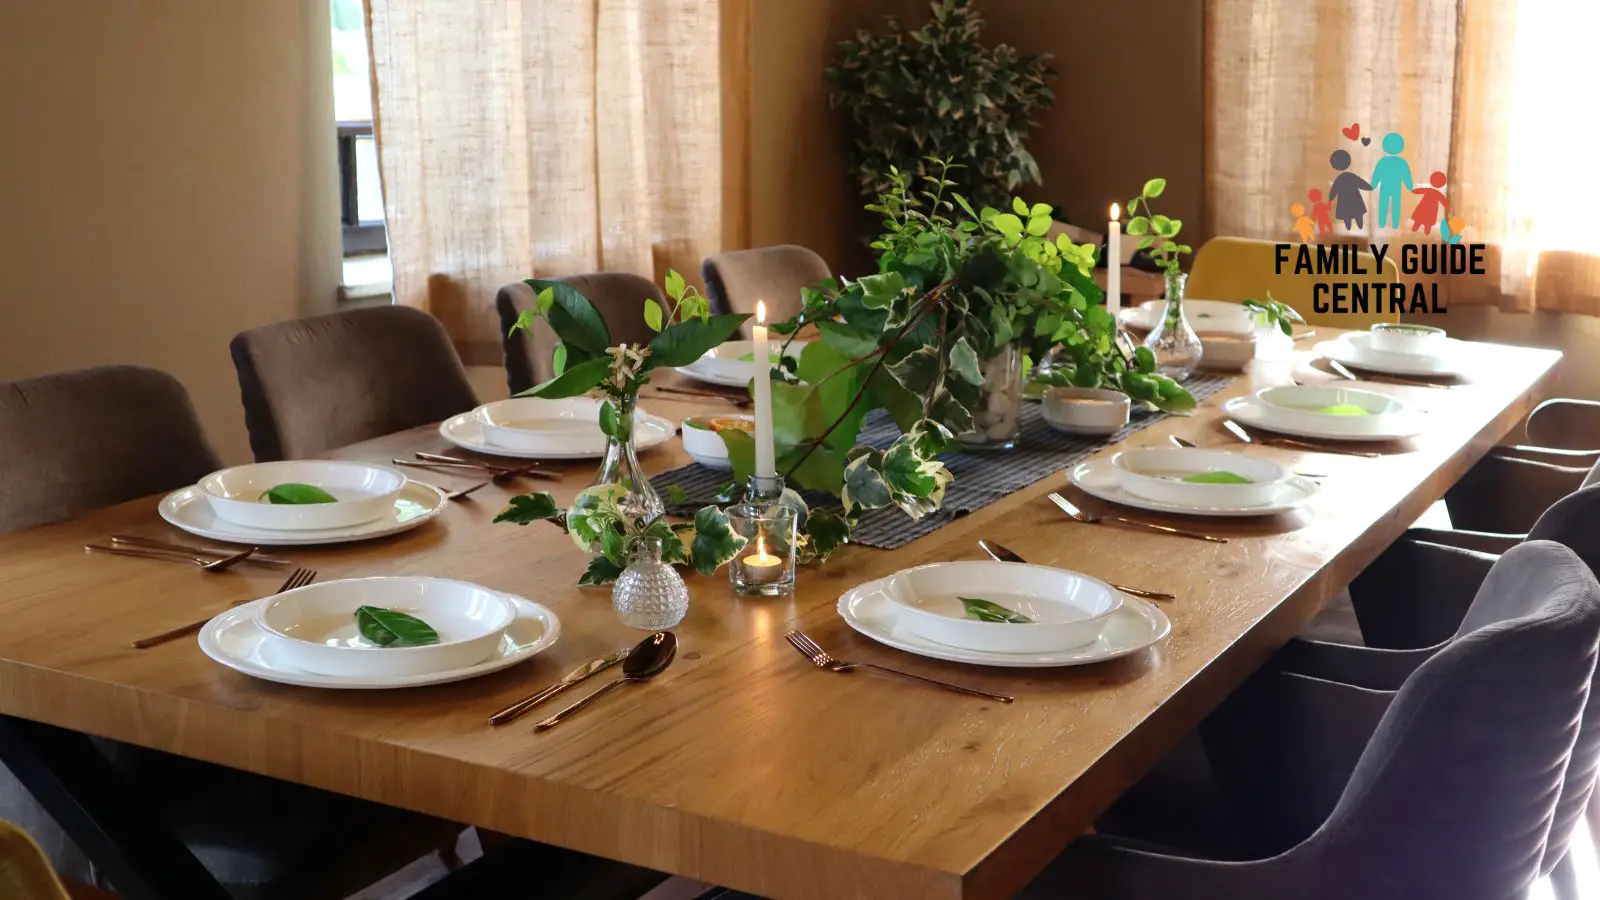 Big brown dining table with white plates and center plant piece - familyguidecentral.com